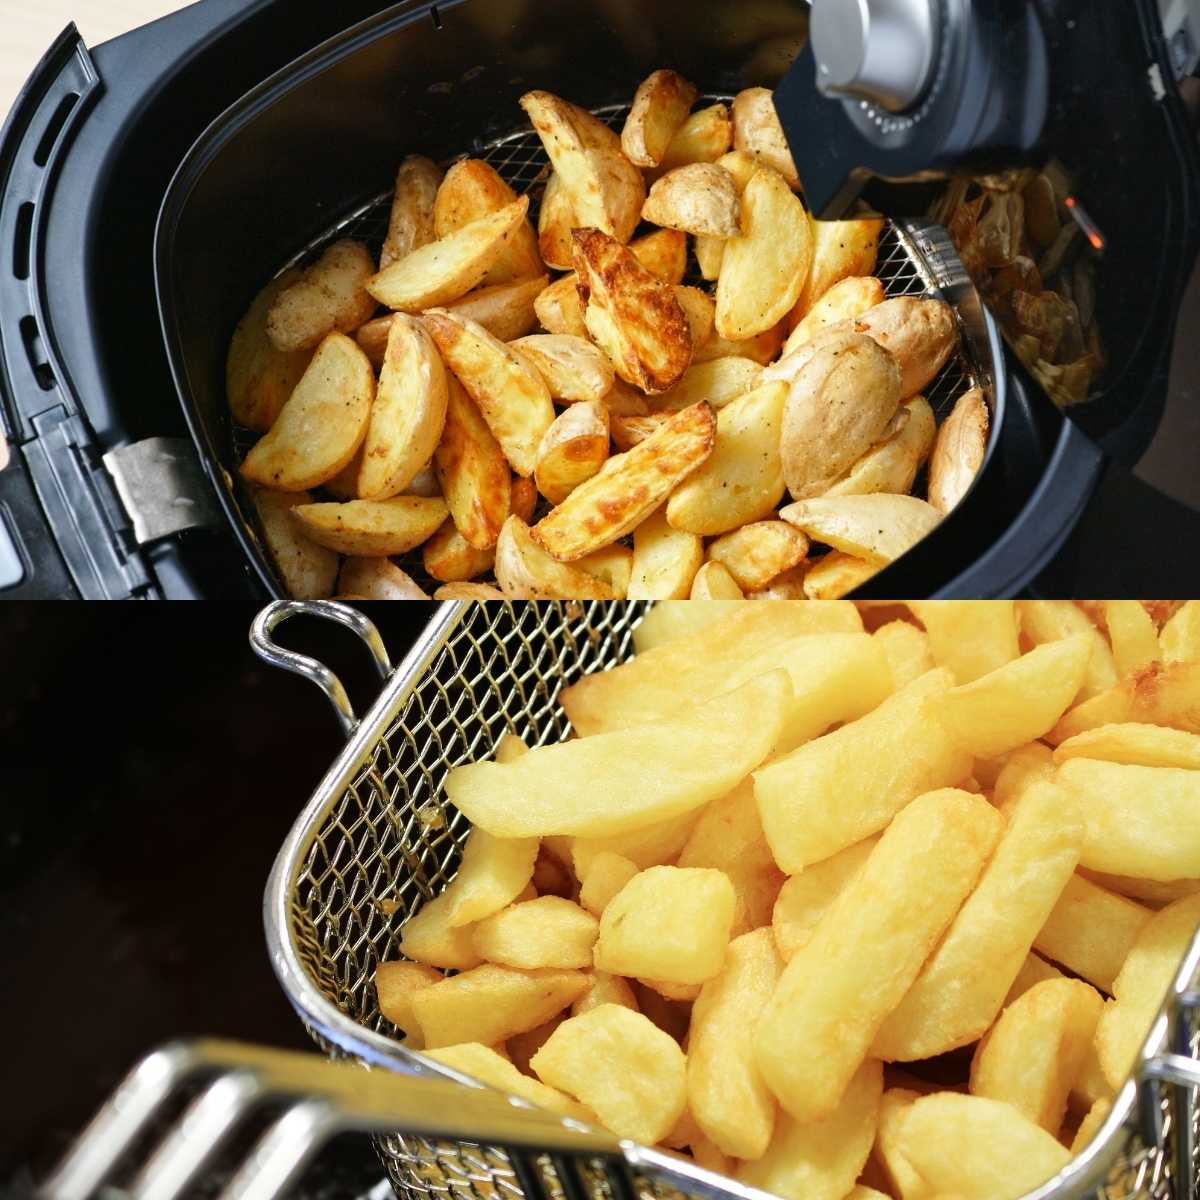 Image of an air fryer full of crispy potato fries above an image of a deep fryer basket with crispy potato fries.